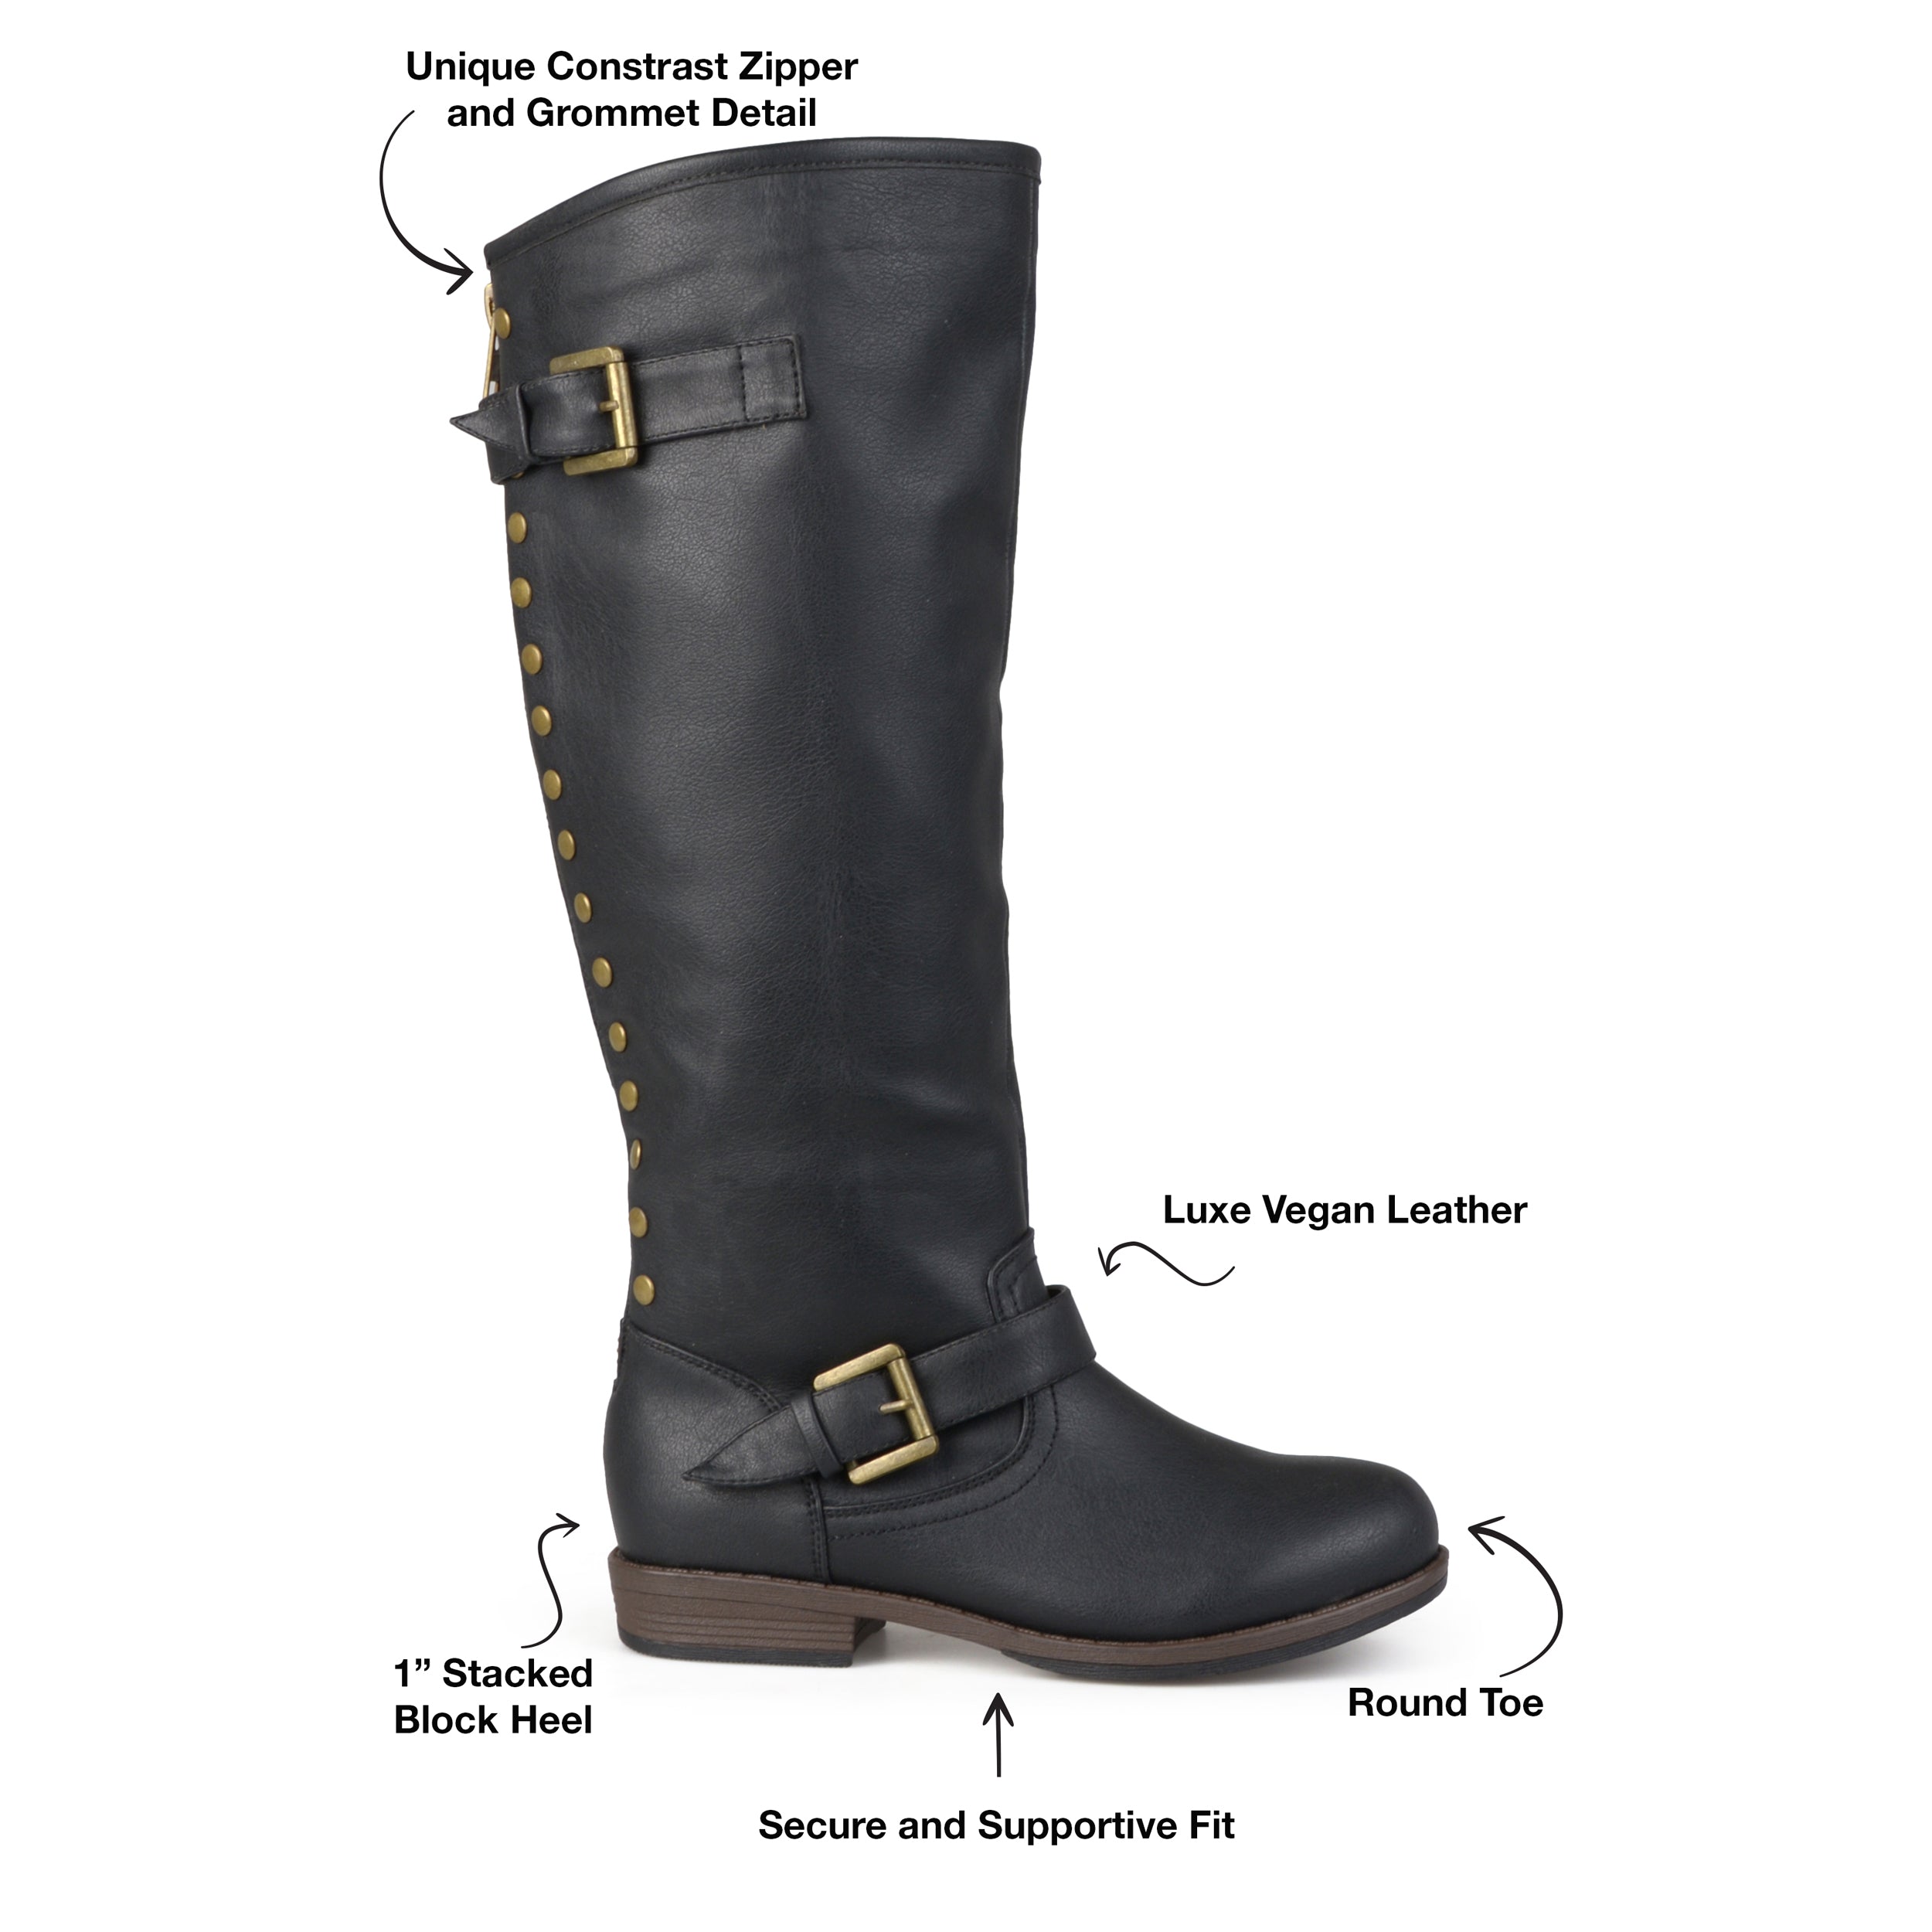 Best Wide Calf Boots for 2018  Wide calf boots, Wide calf leather